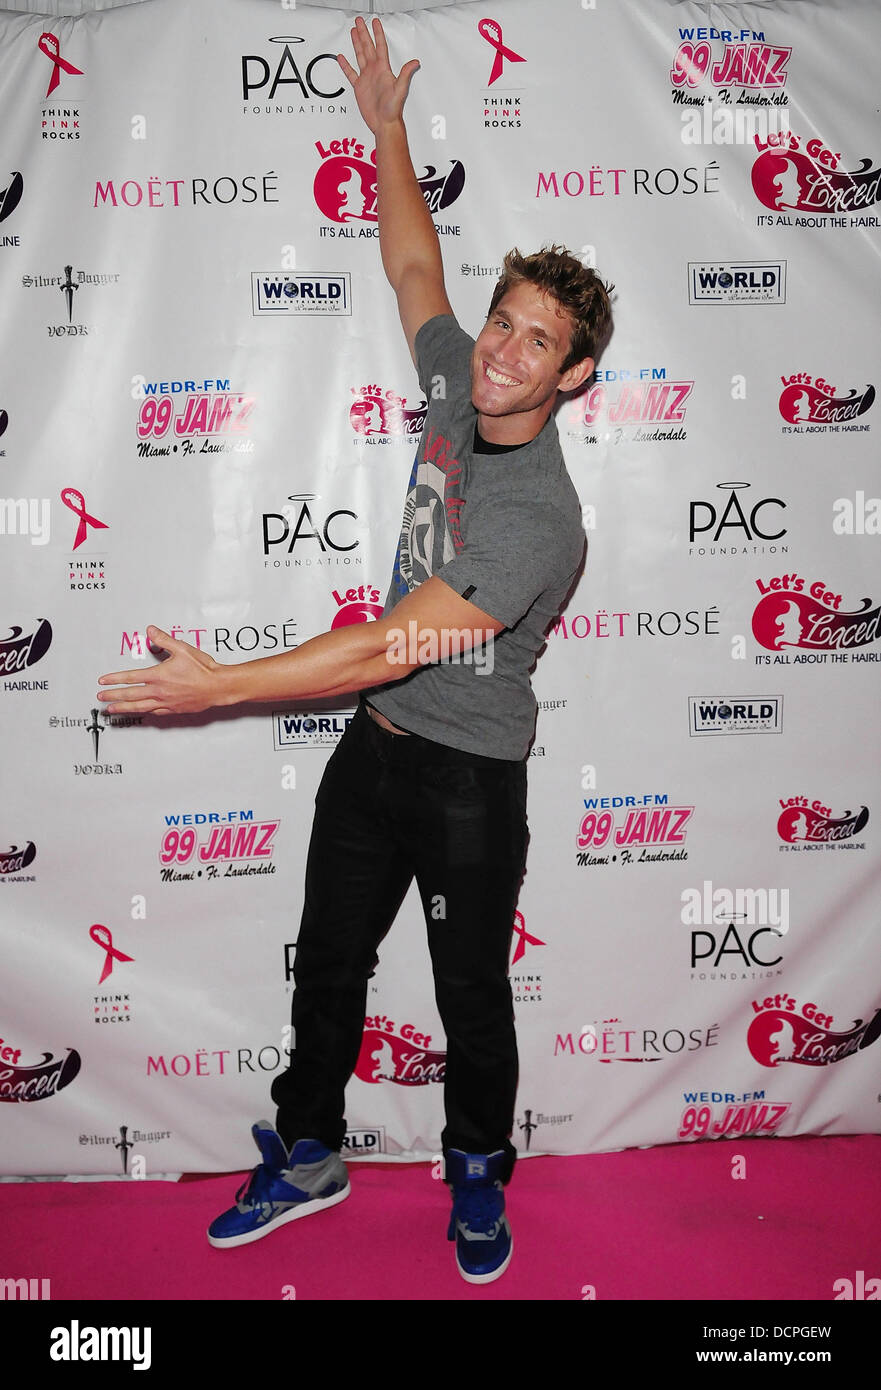 CJ koegel from MTV Real World Cancun  at 'Lets Get Laced And Think Pink Rocks Fundraiser' to benefit the Sylvester Comprehensive Cancer Center held at Club Play Miami Beach, Florida - 02.11.11 Stock Photo